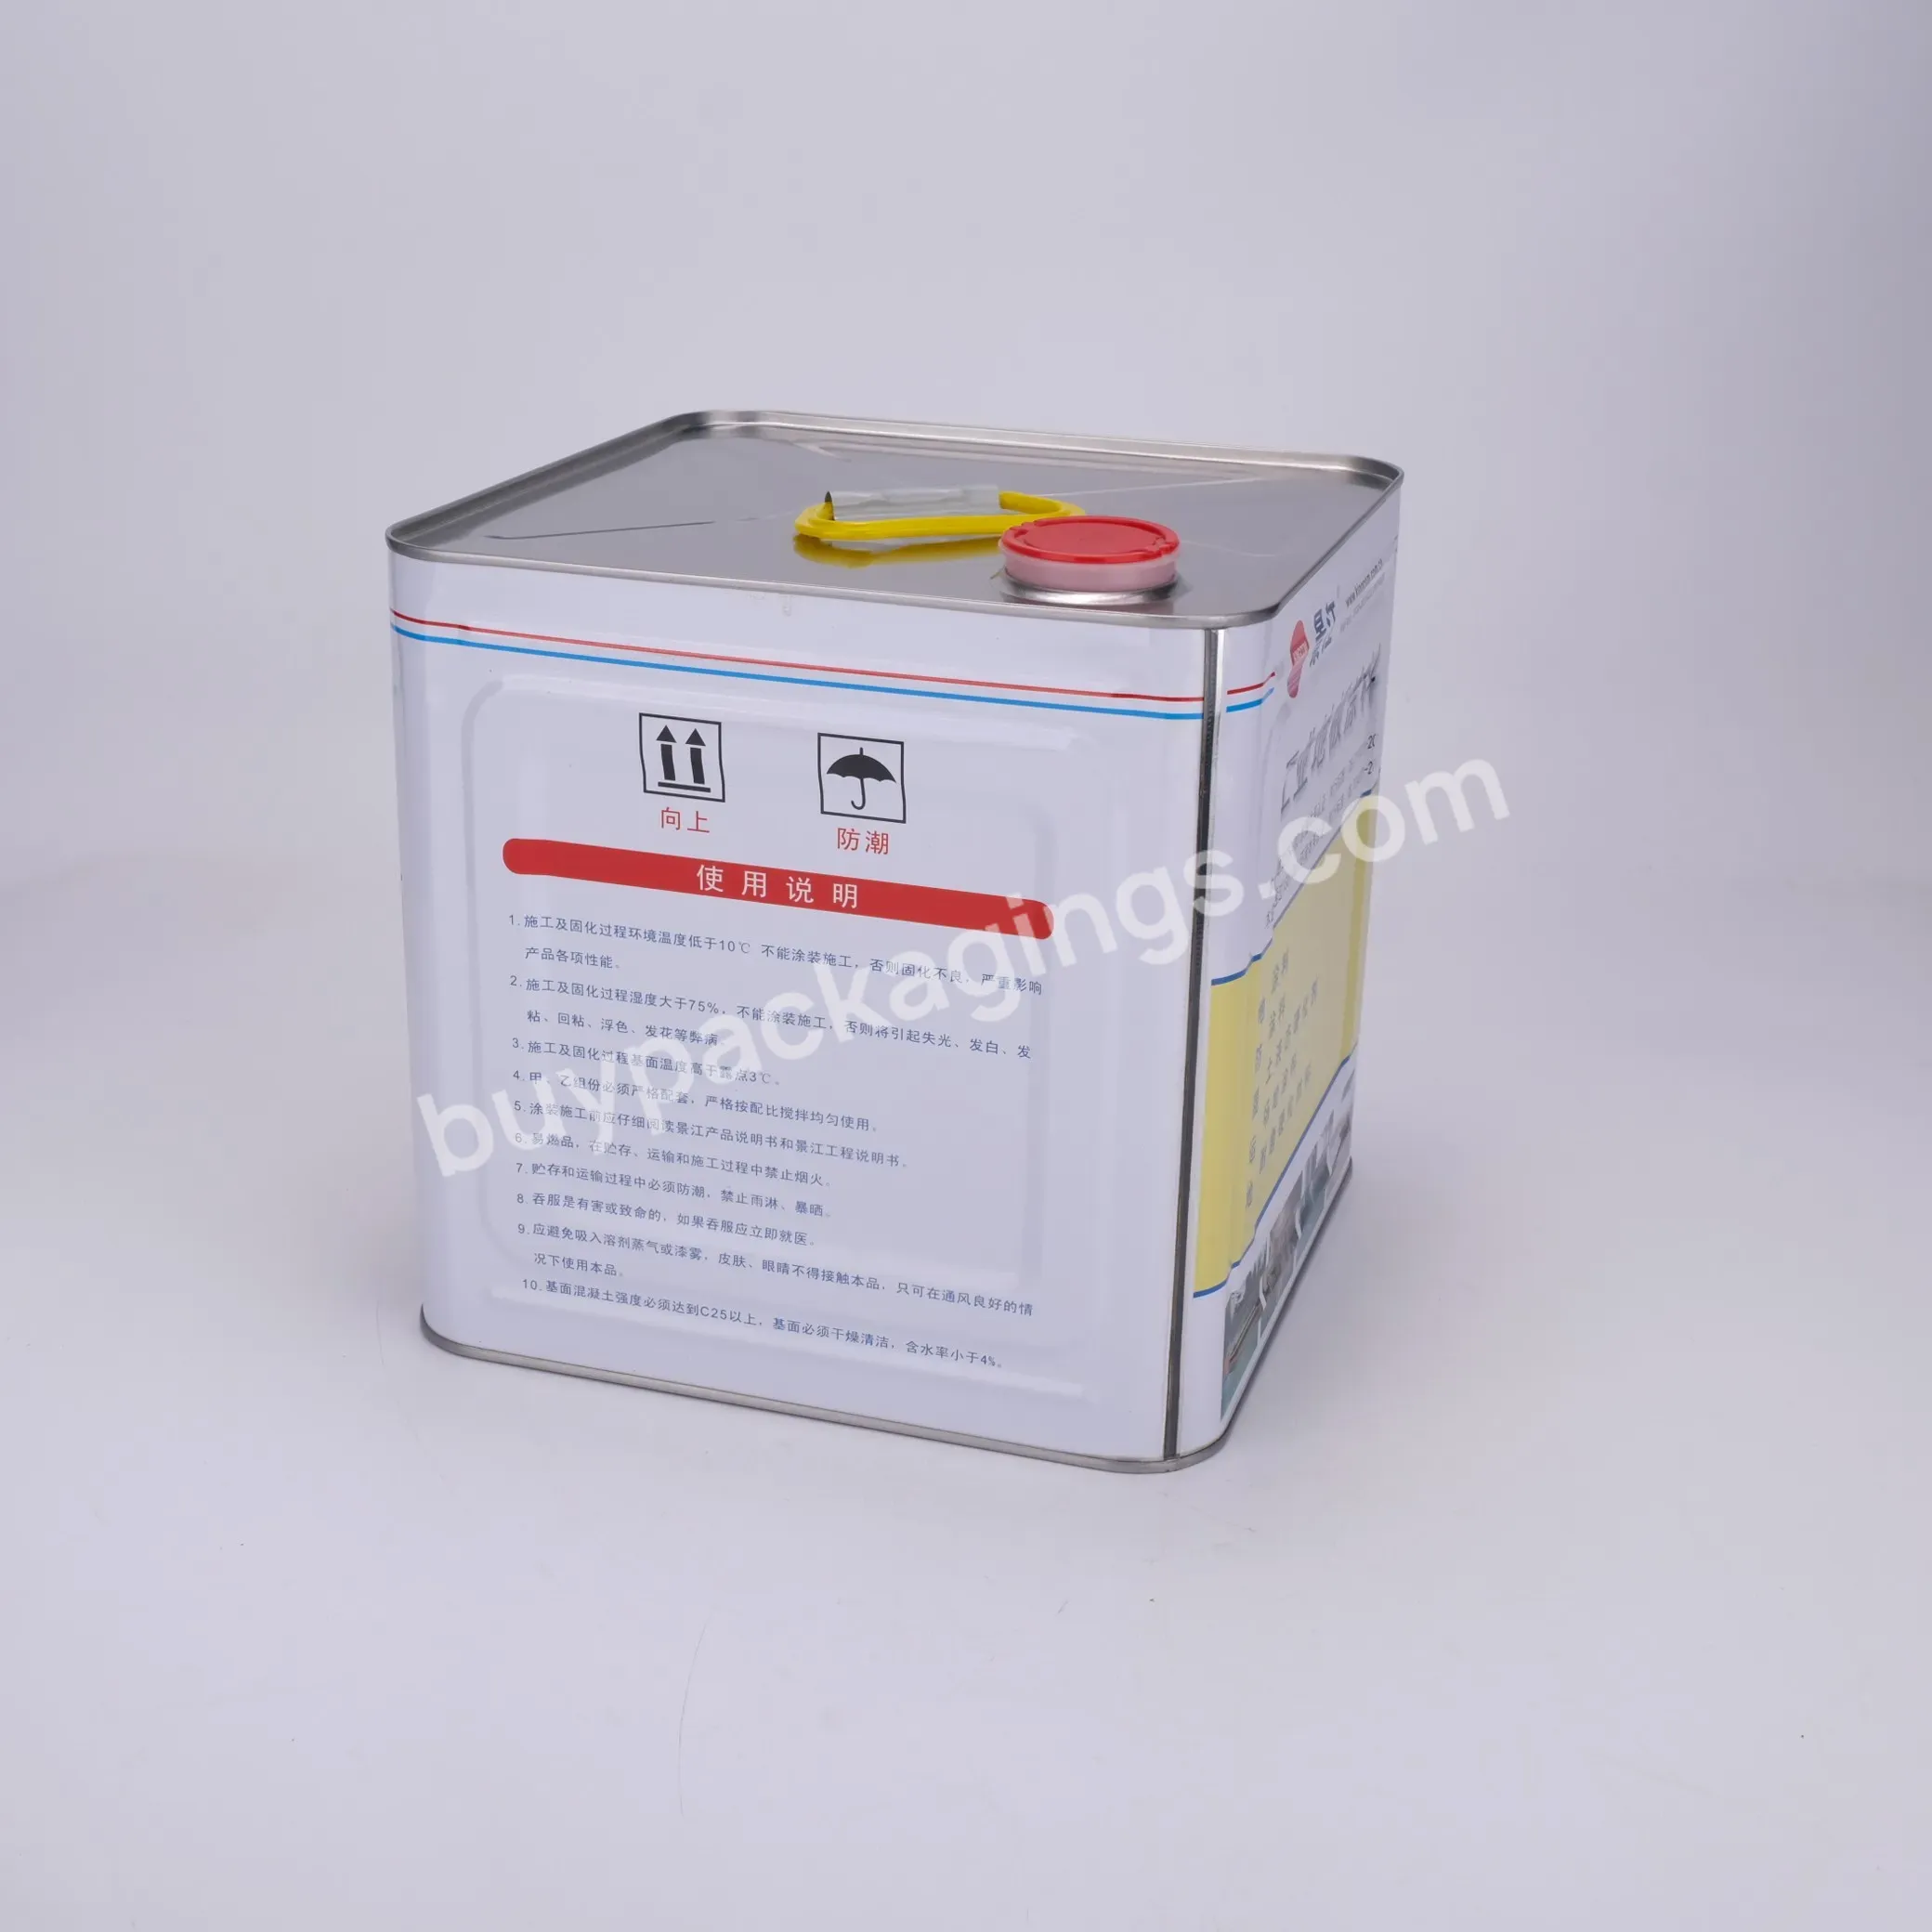 10 Liter Meta Container Square Tin Can For Glue Oil With Plastic Lid - Buy 10 Liter Square Oil Tin Can,10 Litre Metal Container,Tin Can For Glue Oil.